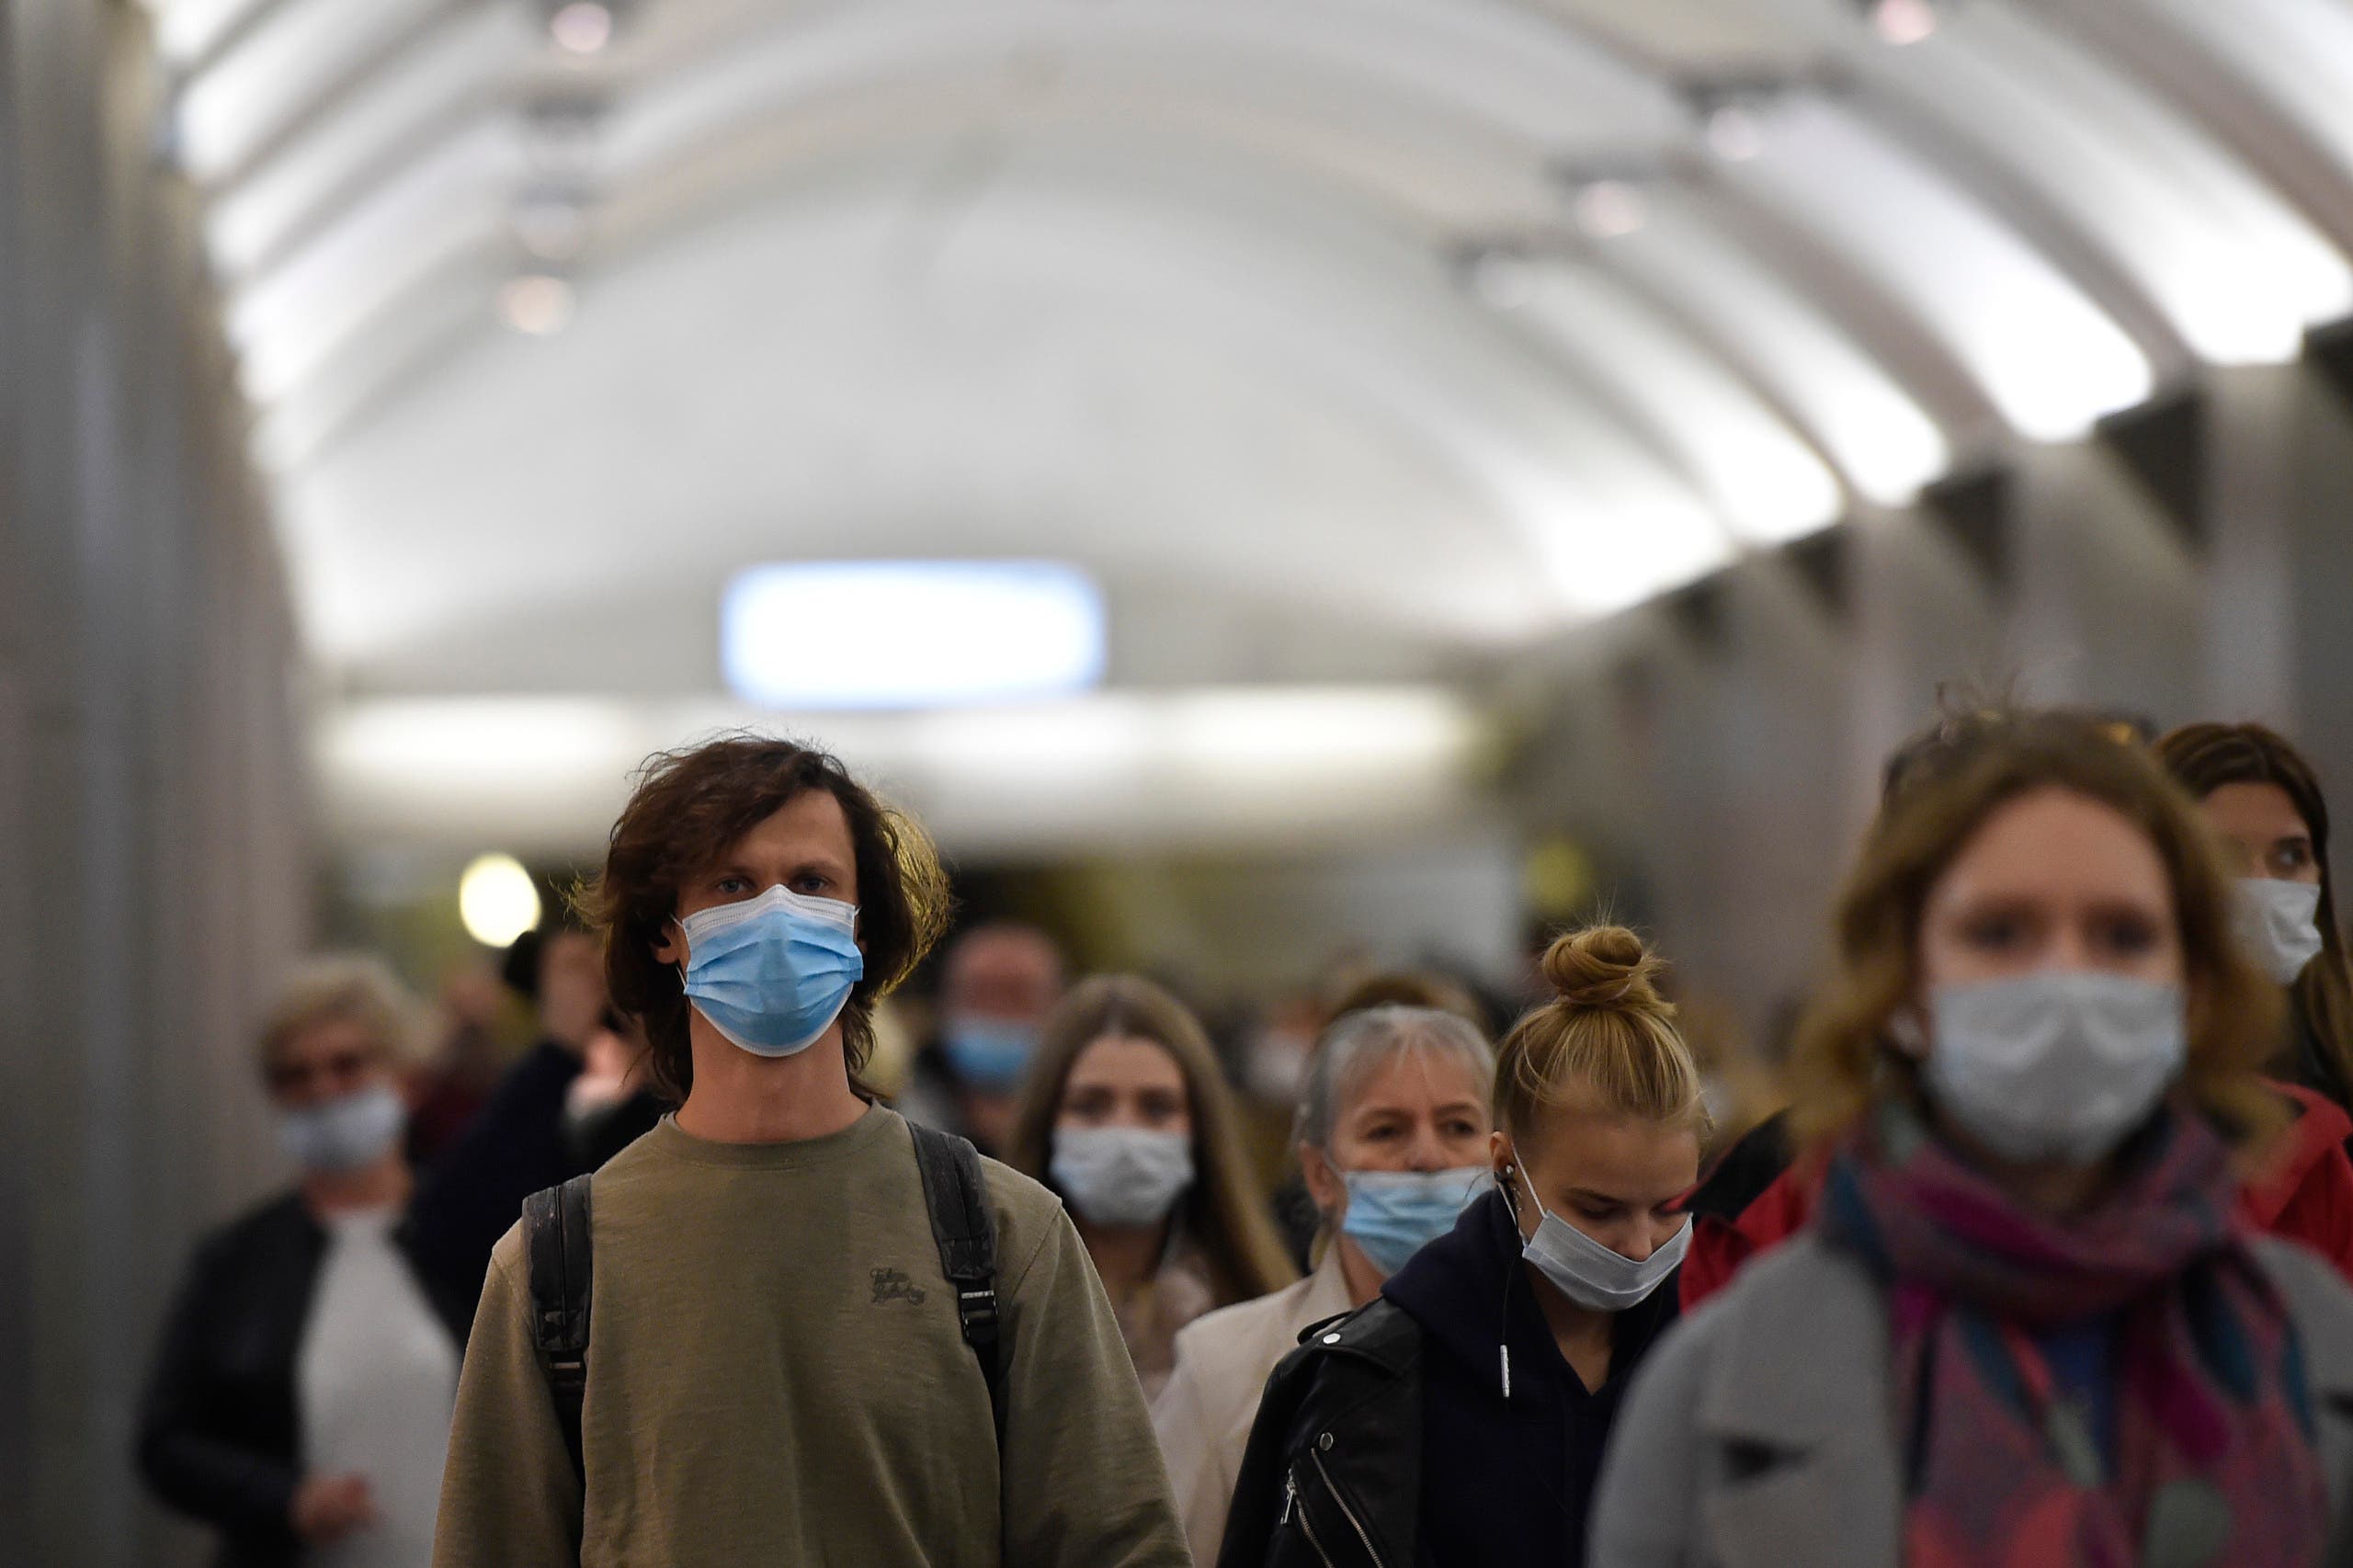 Commuters wearing face masks walk at Sretensky Bulvar metro station in Moscow on October 7, 2020, amid the ongoing coronavirus disease pandemic. (AFP)